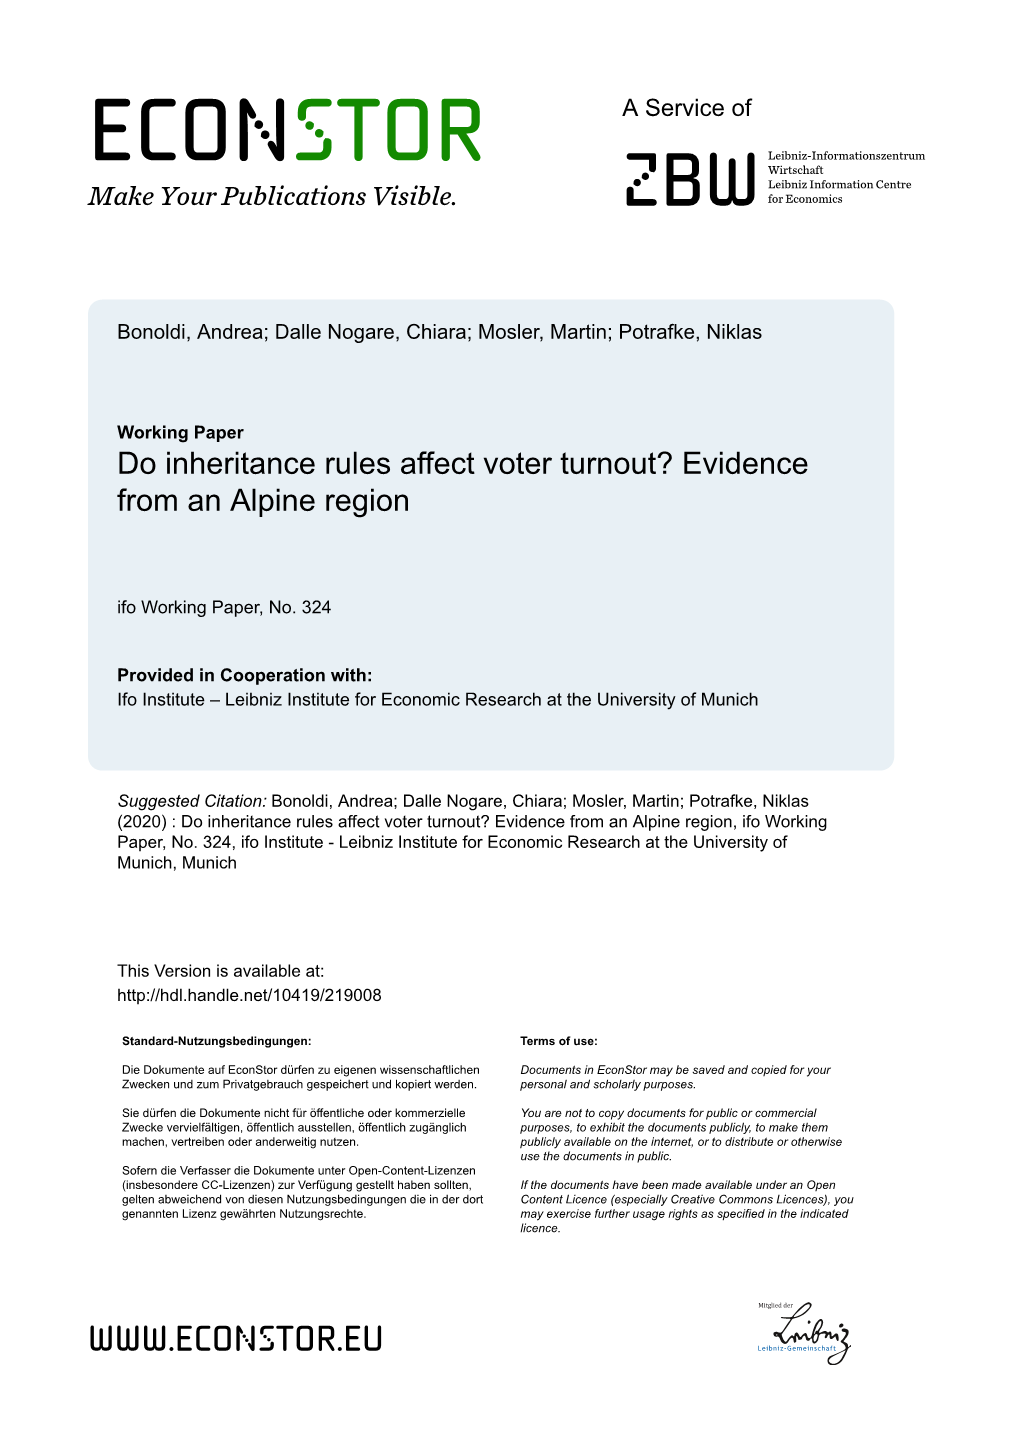 Do Inheritance Rules Affect Voter Turnout? Evidence from an Alpine Region